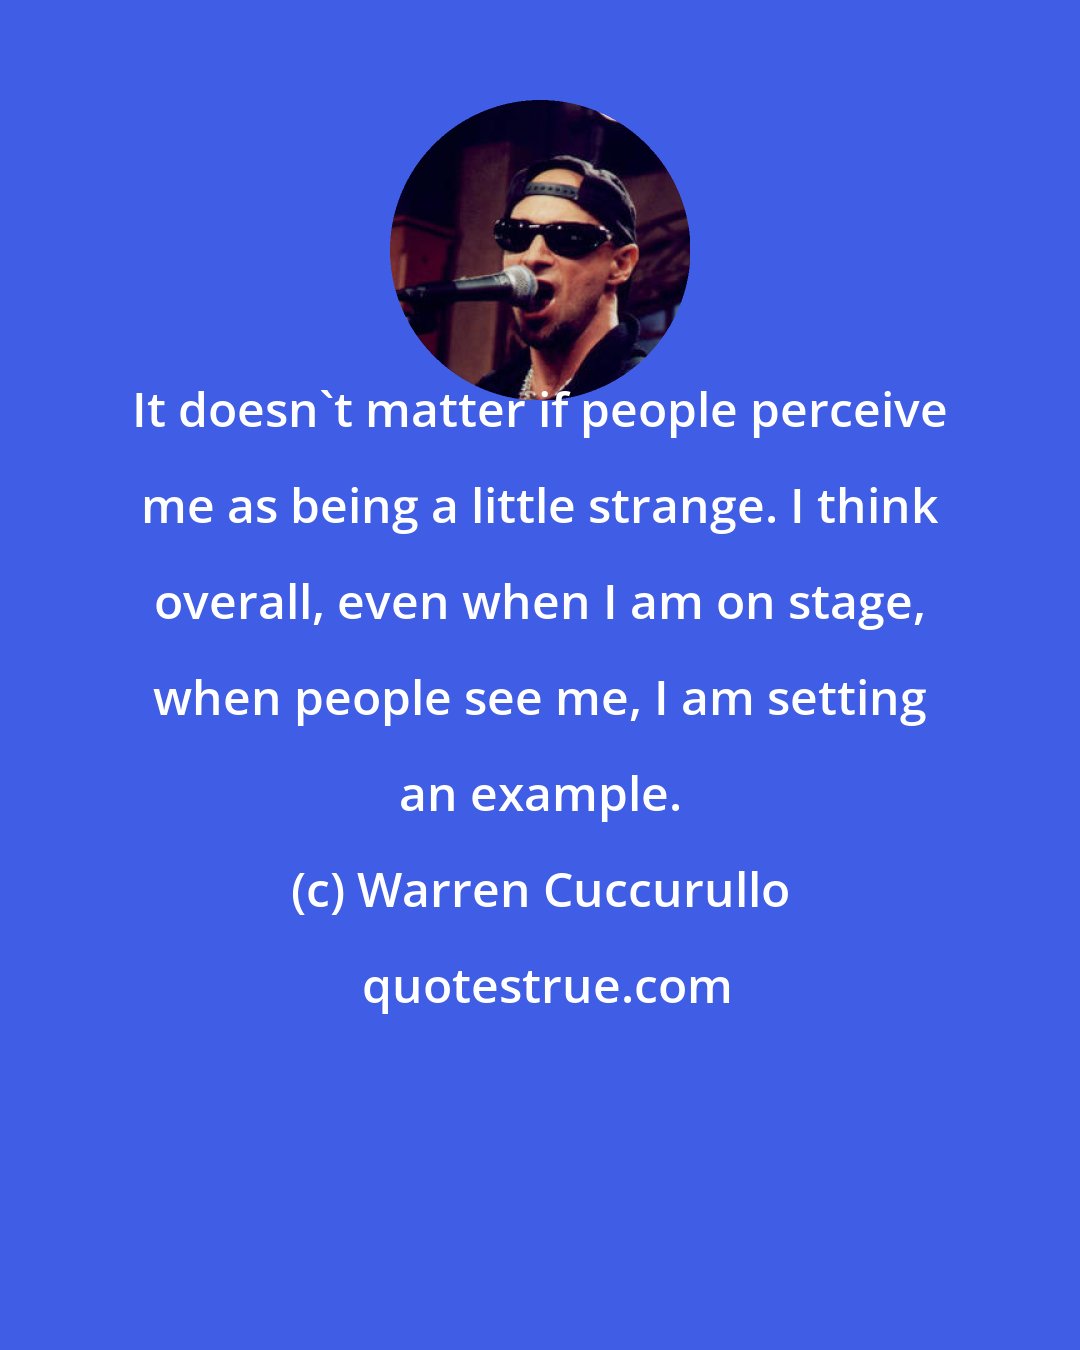 Warren Cuccurullo: It doesn't matter if people perceive me as being a little strange. I think overall, even when I am on stage, when people see me, I am setting an example.